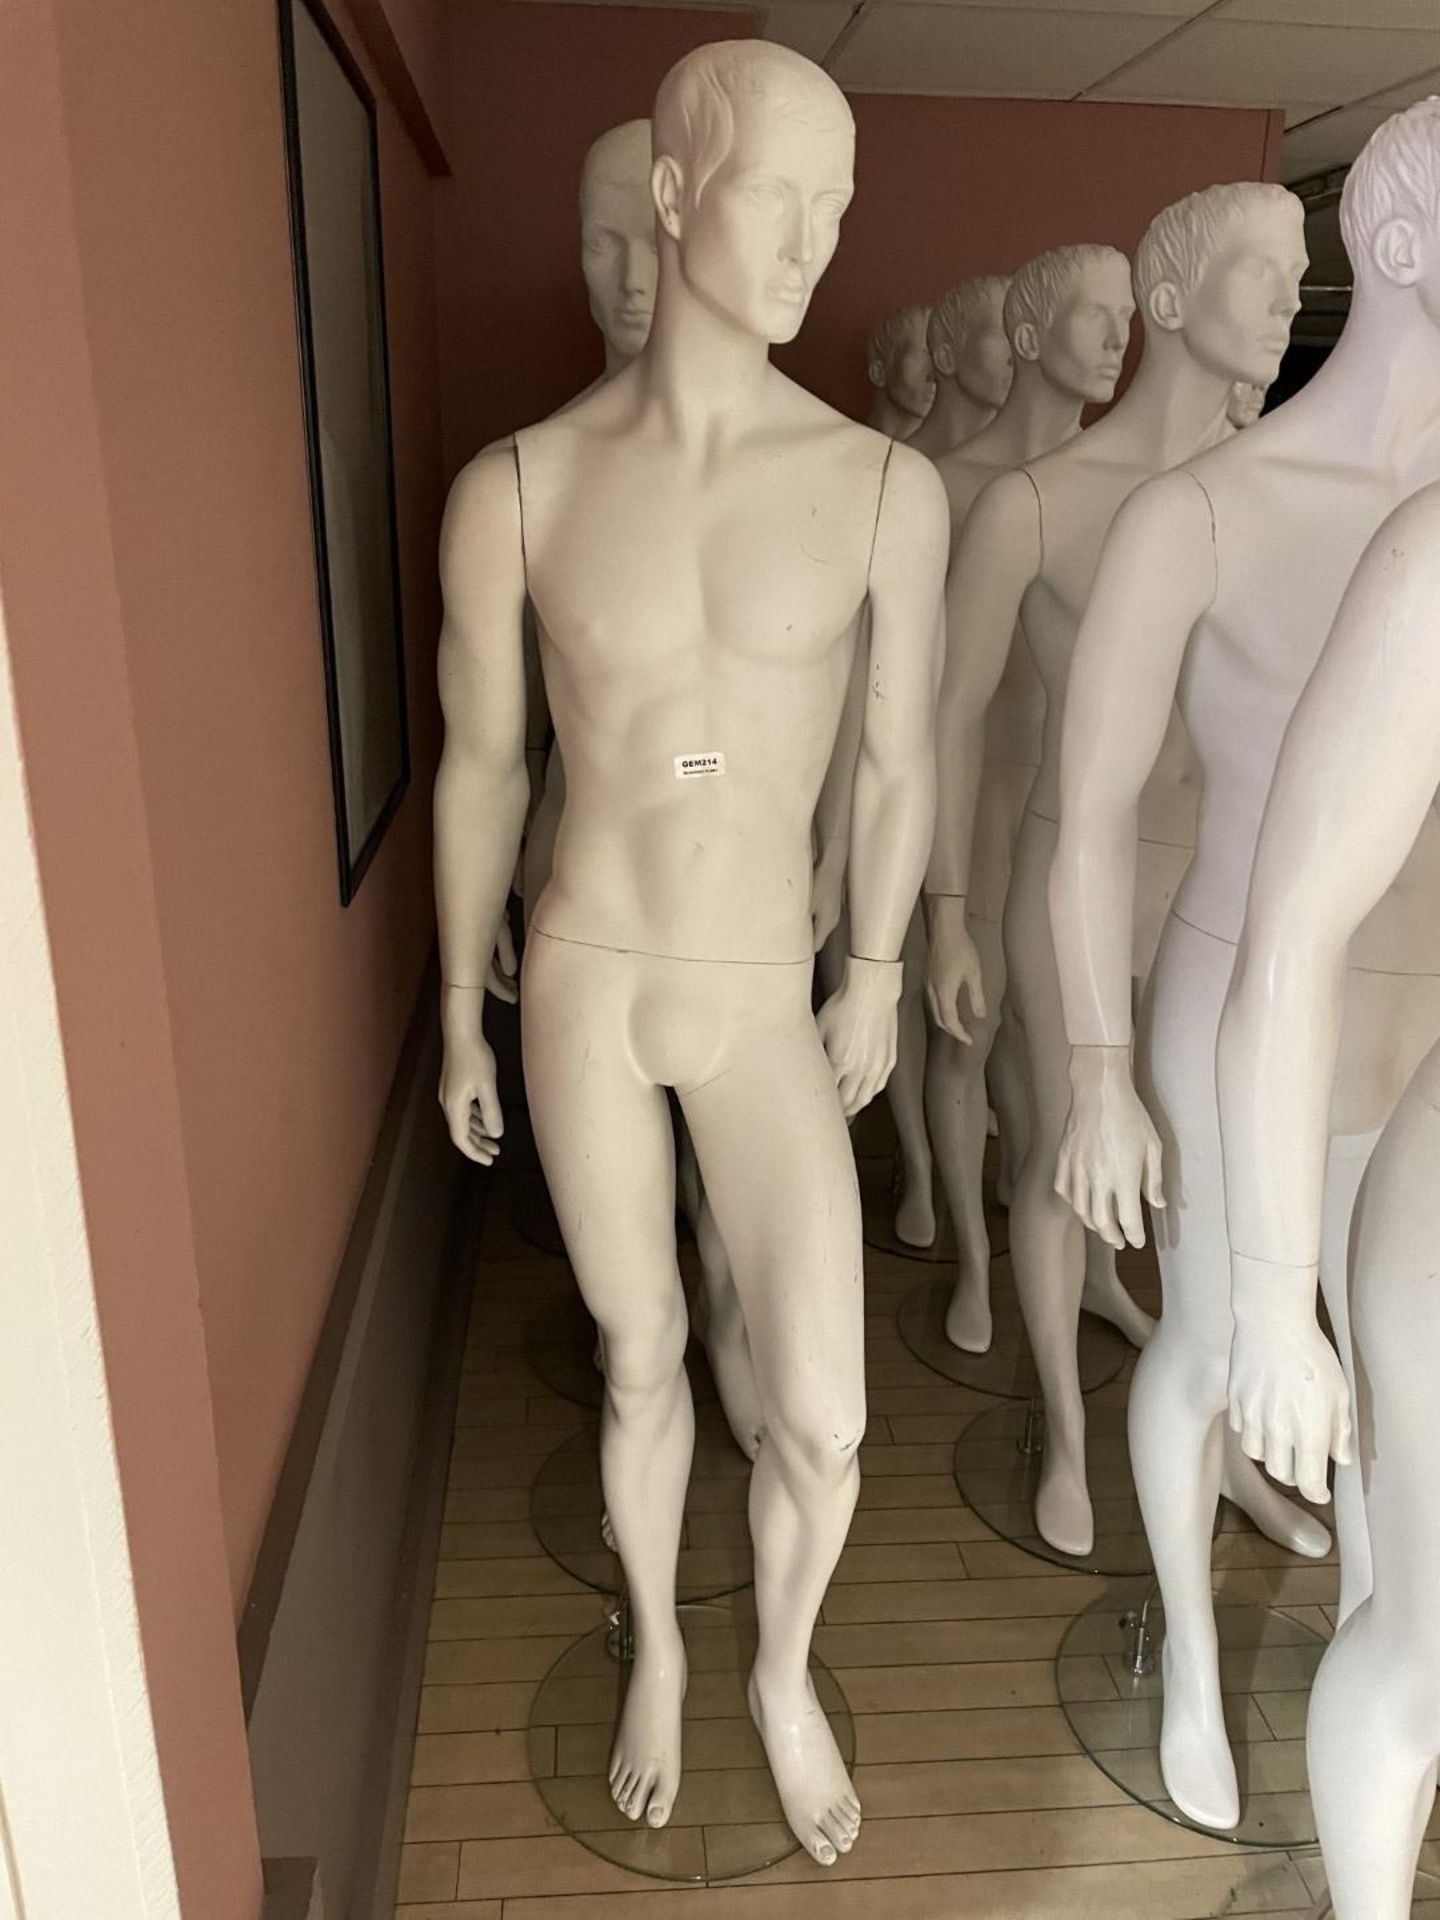 4 x Full Size Male Mannequins on Stands - CL670 - Ref: GEM214 - Location: Gravesend, DA11 - Image 6 of 7